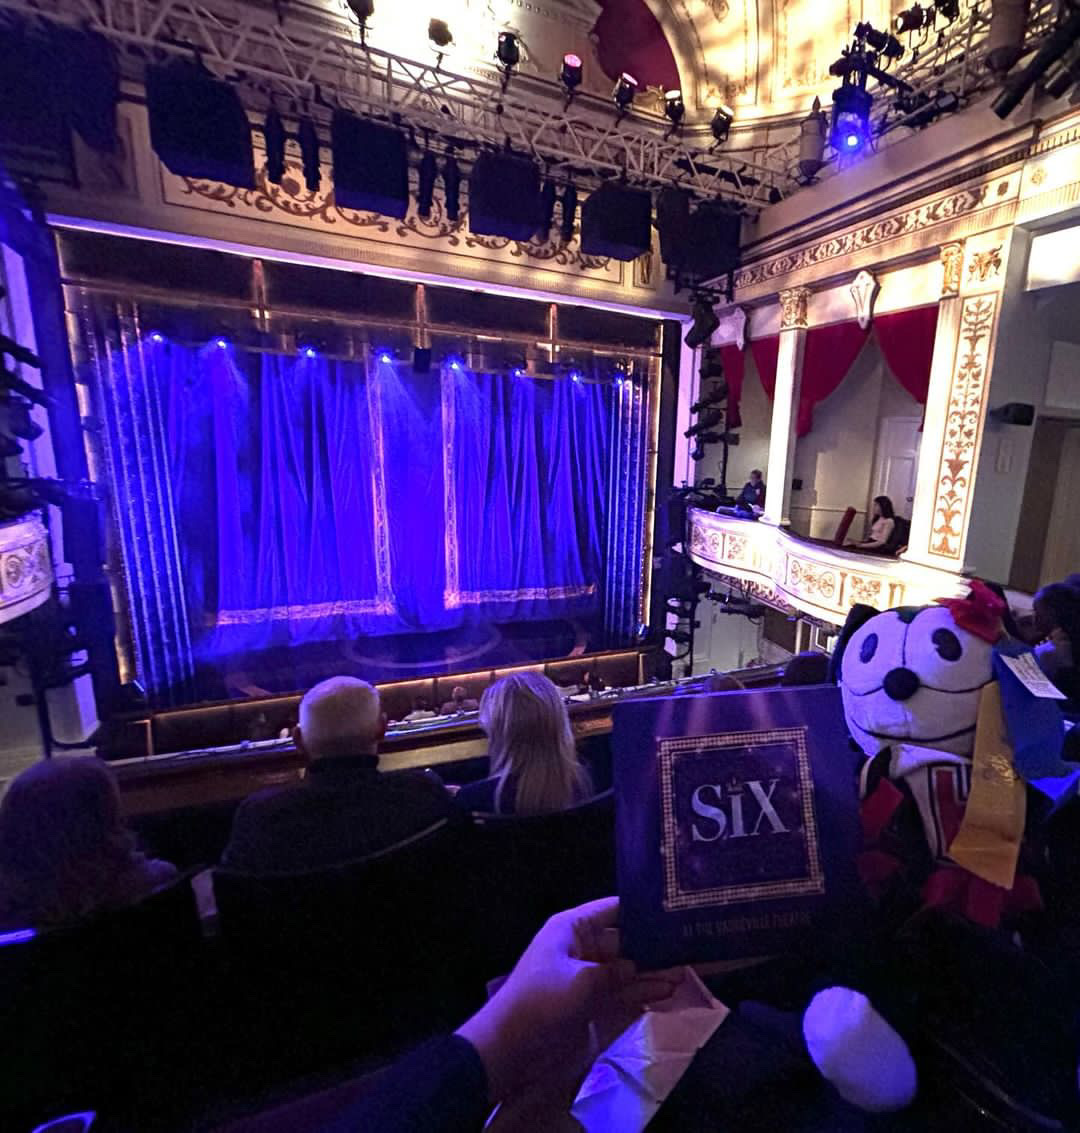 Felix waits patiently and attends the showing of Six: the Musical at the Vaudeville Theatre. Padilla also watched Hamilton and Wicked the next day at various theatres.